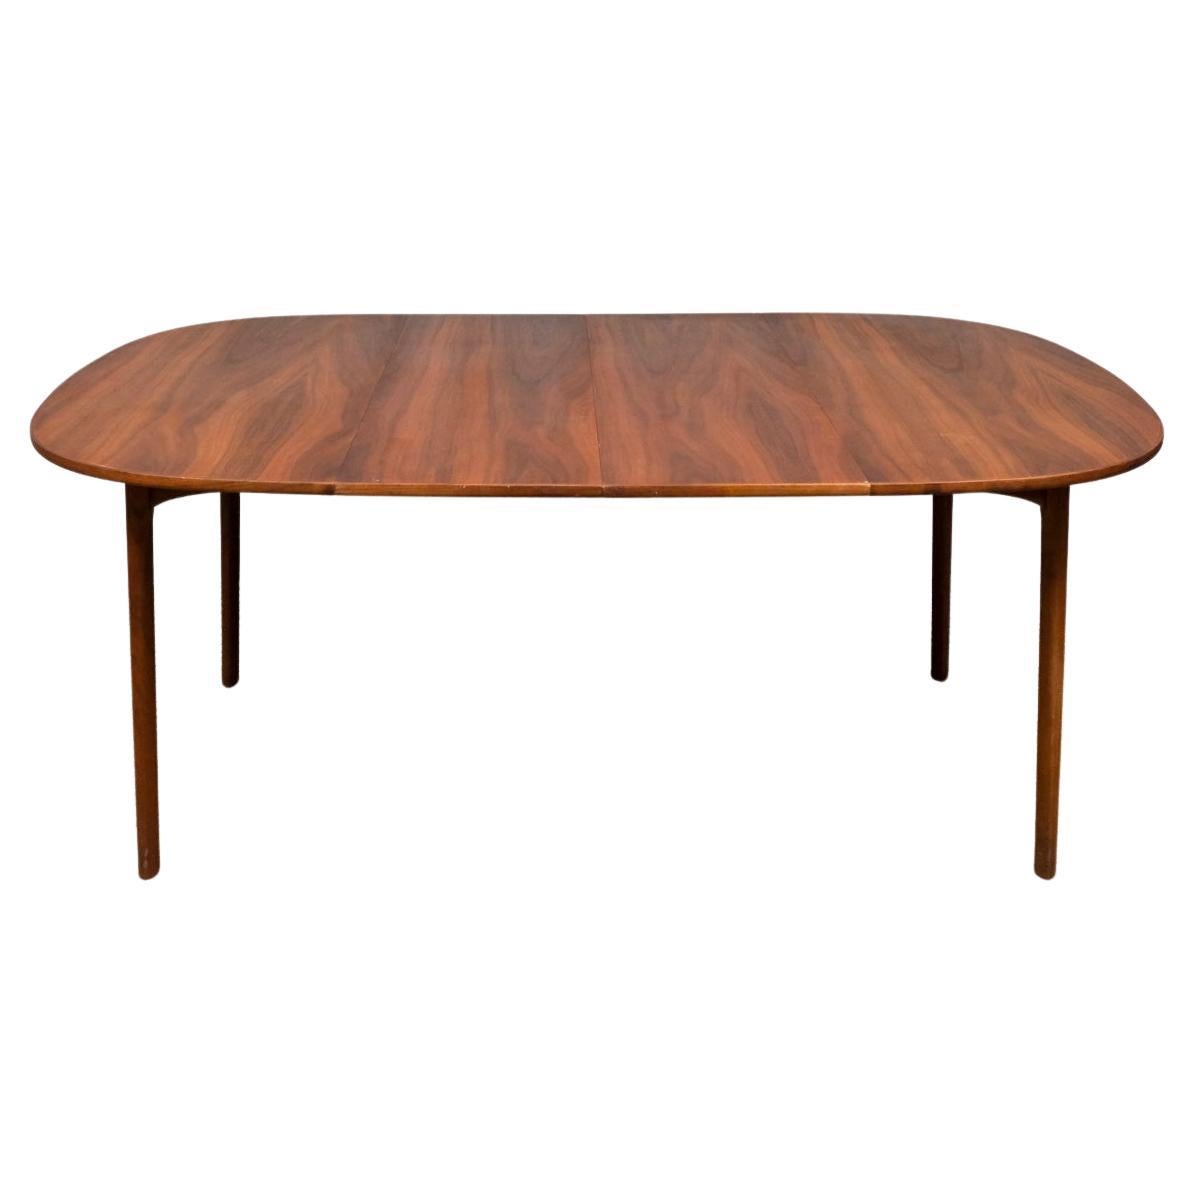 Stunning Mid century modern danish teak rounded dining table with two leaves For Sale